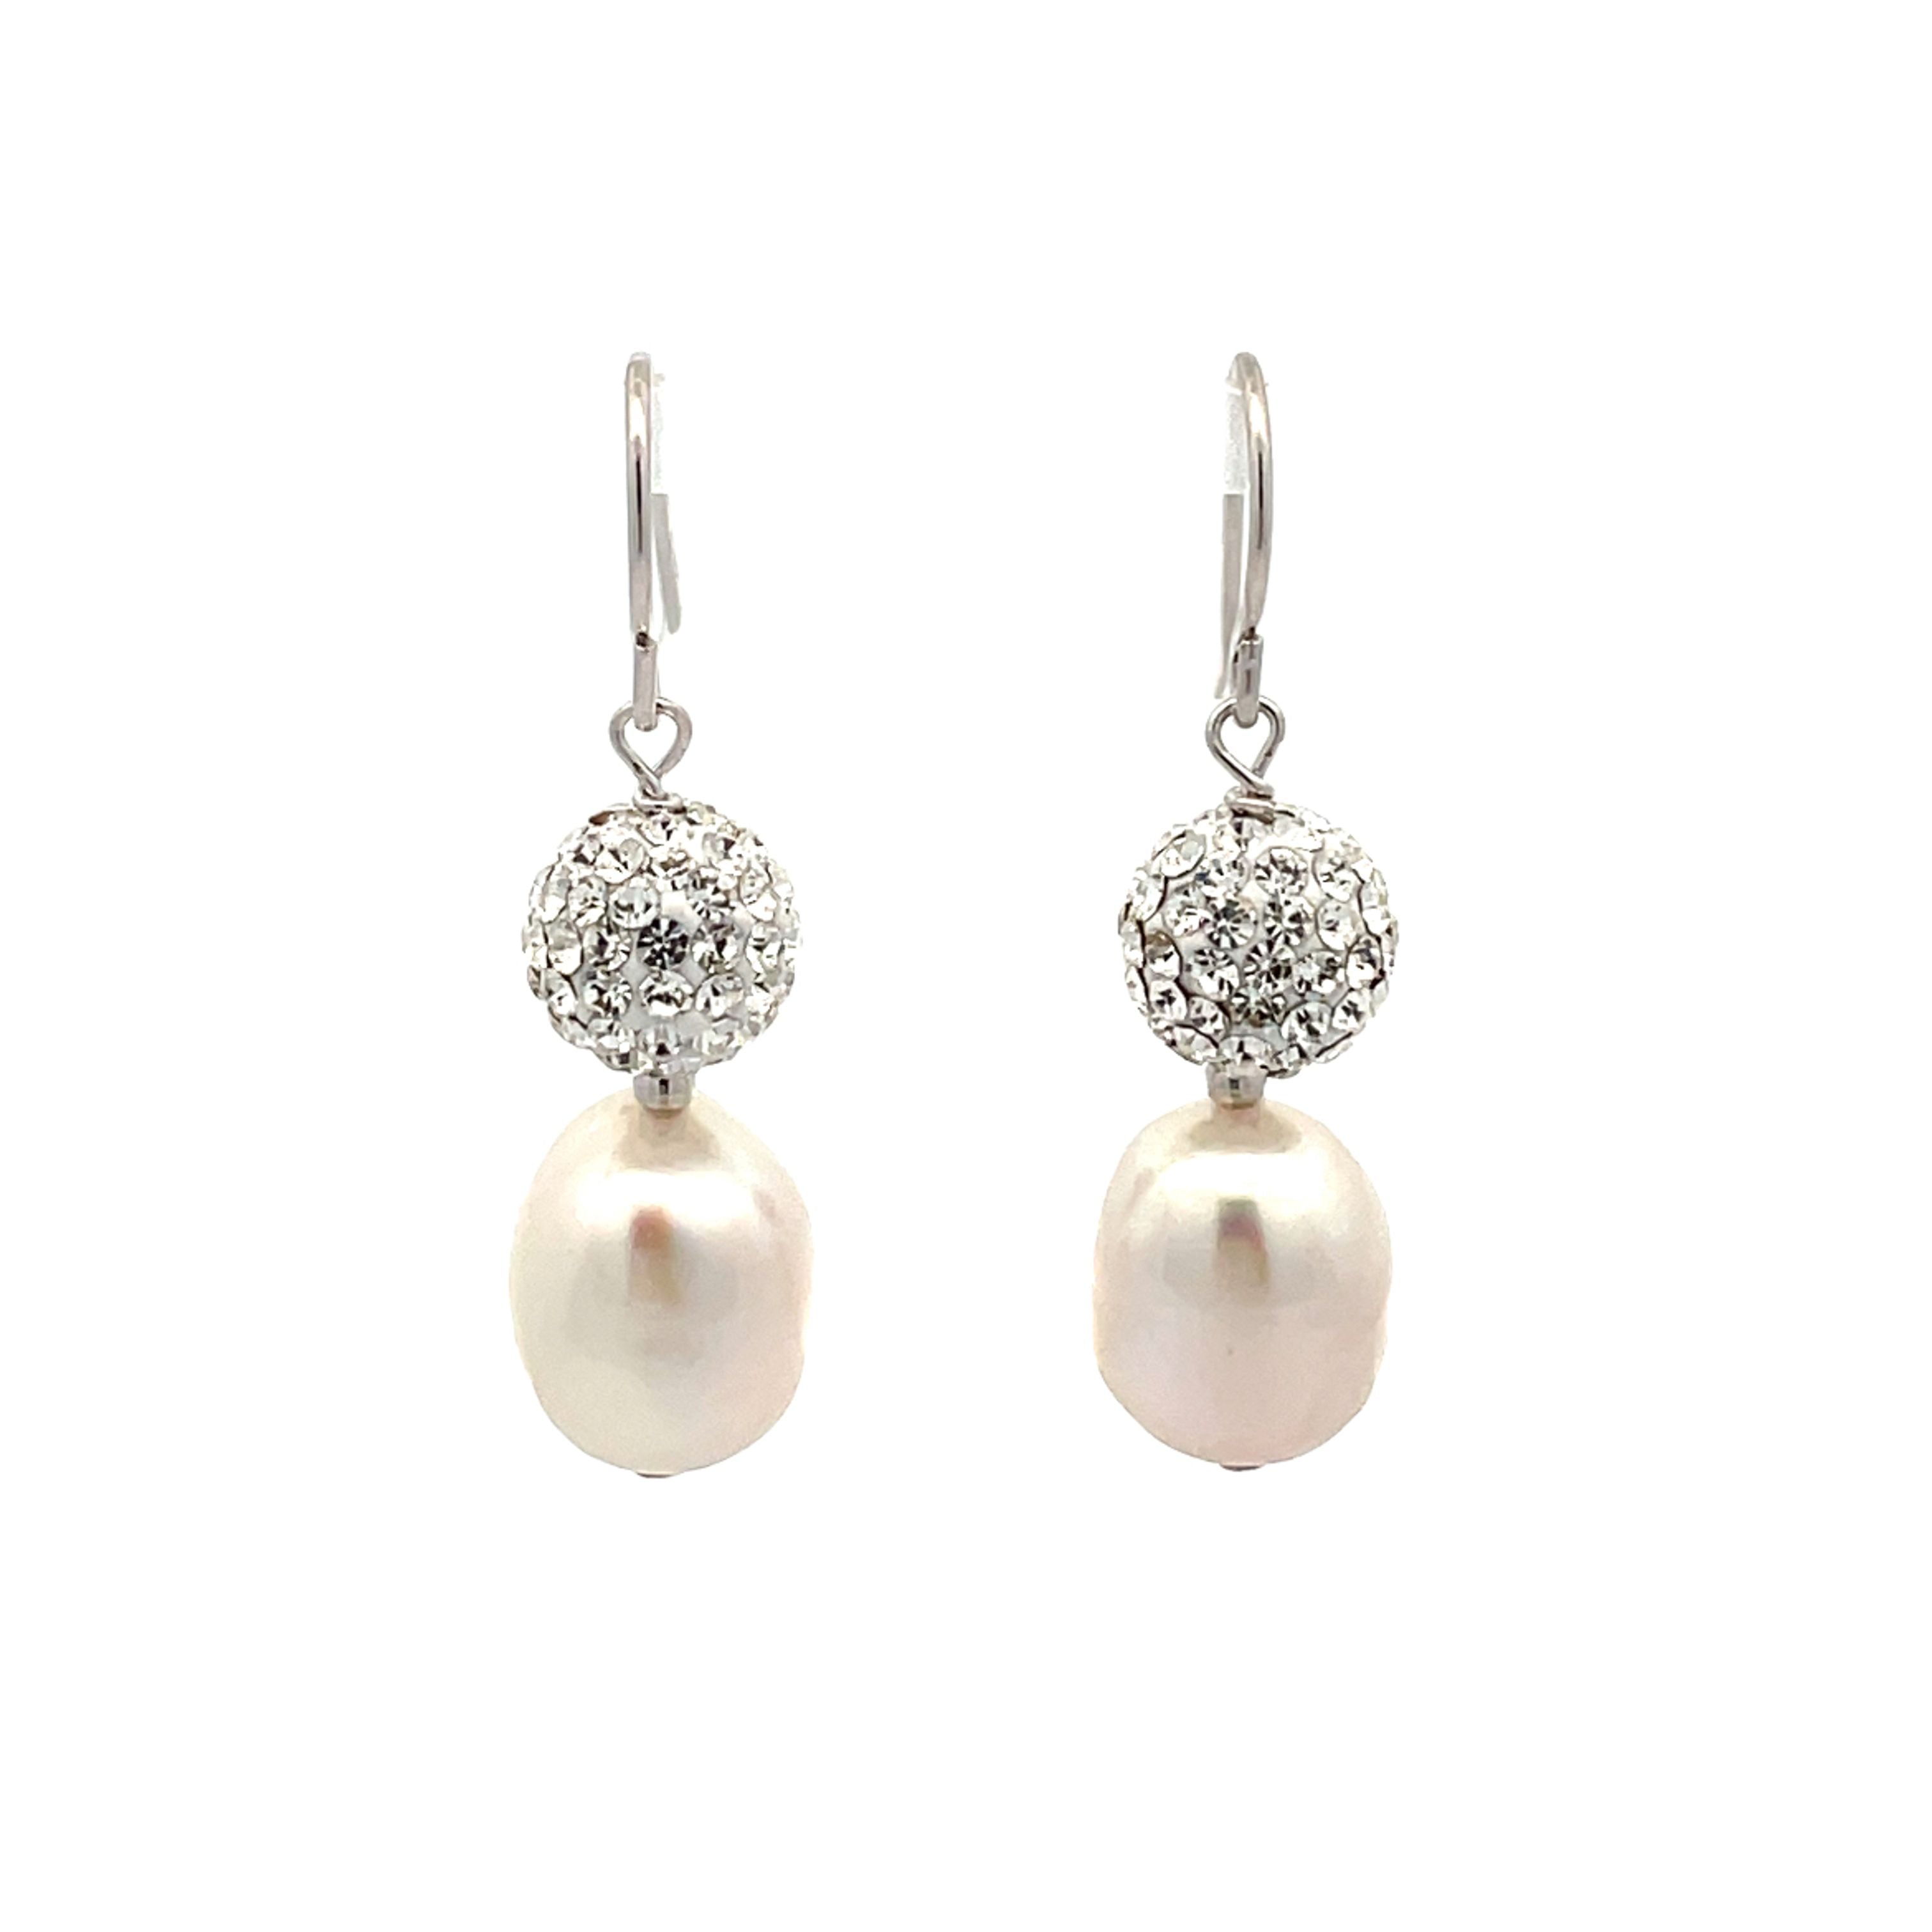 Sterling Silver Freshwater Pearl and Crystal Clay Ball Hook Earrings